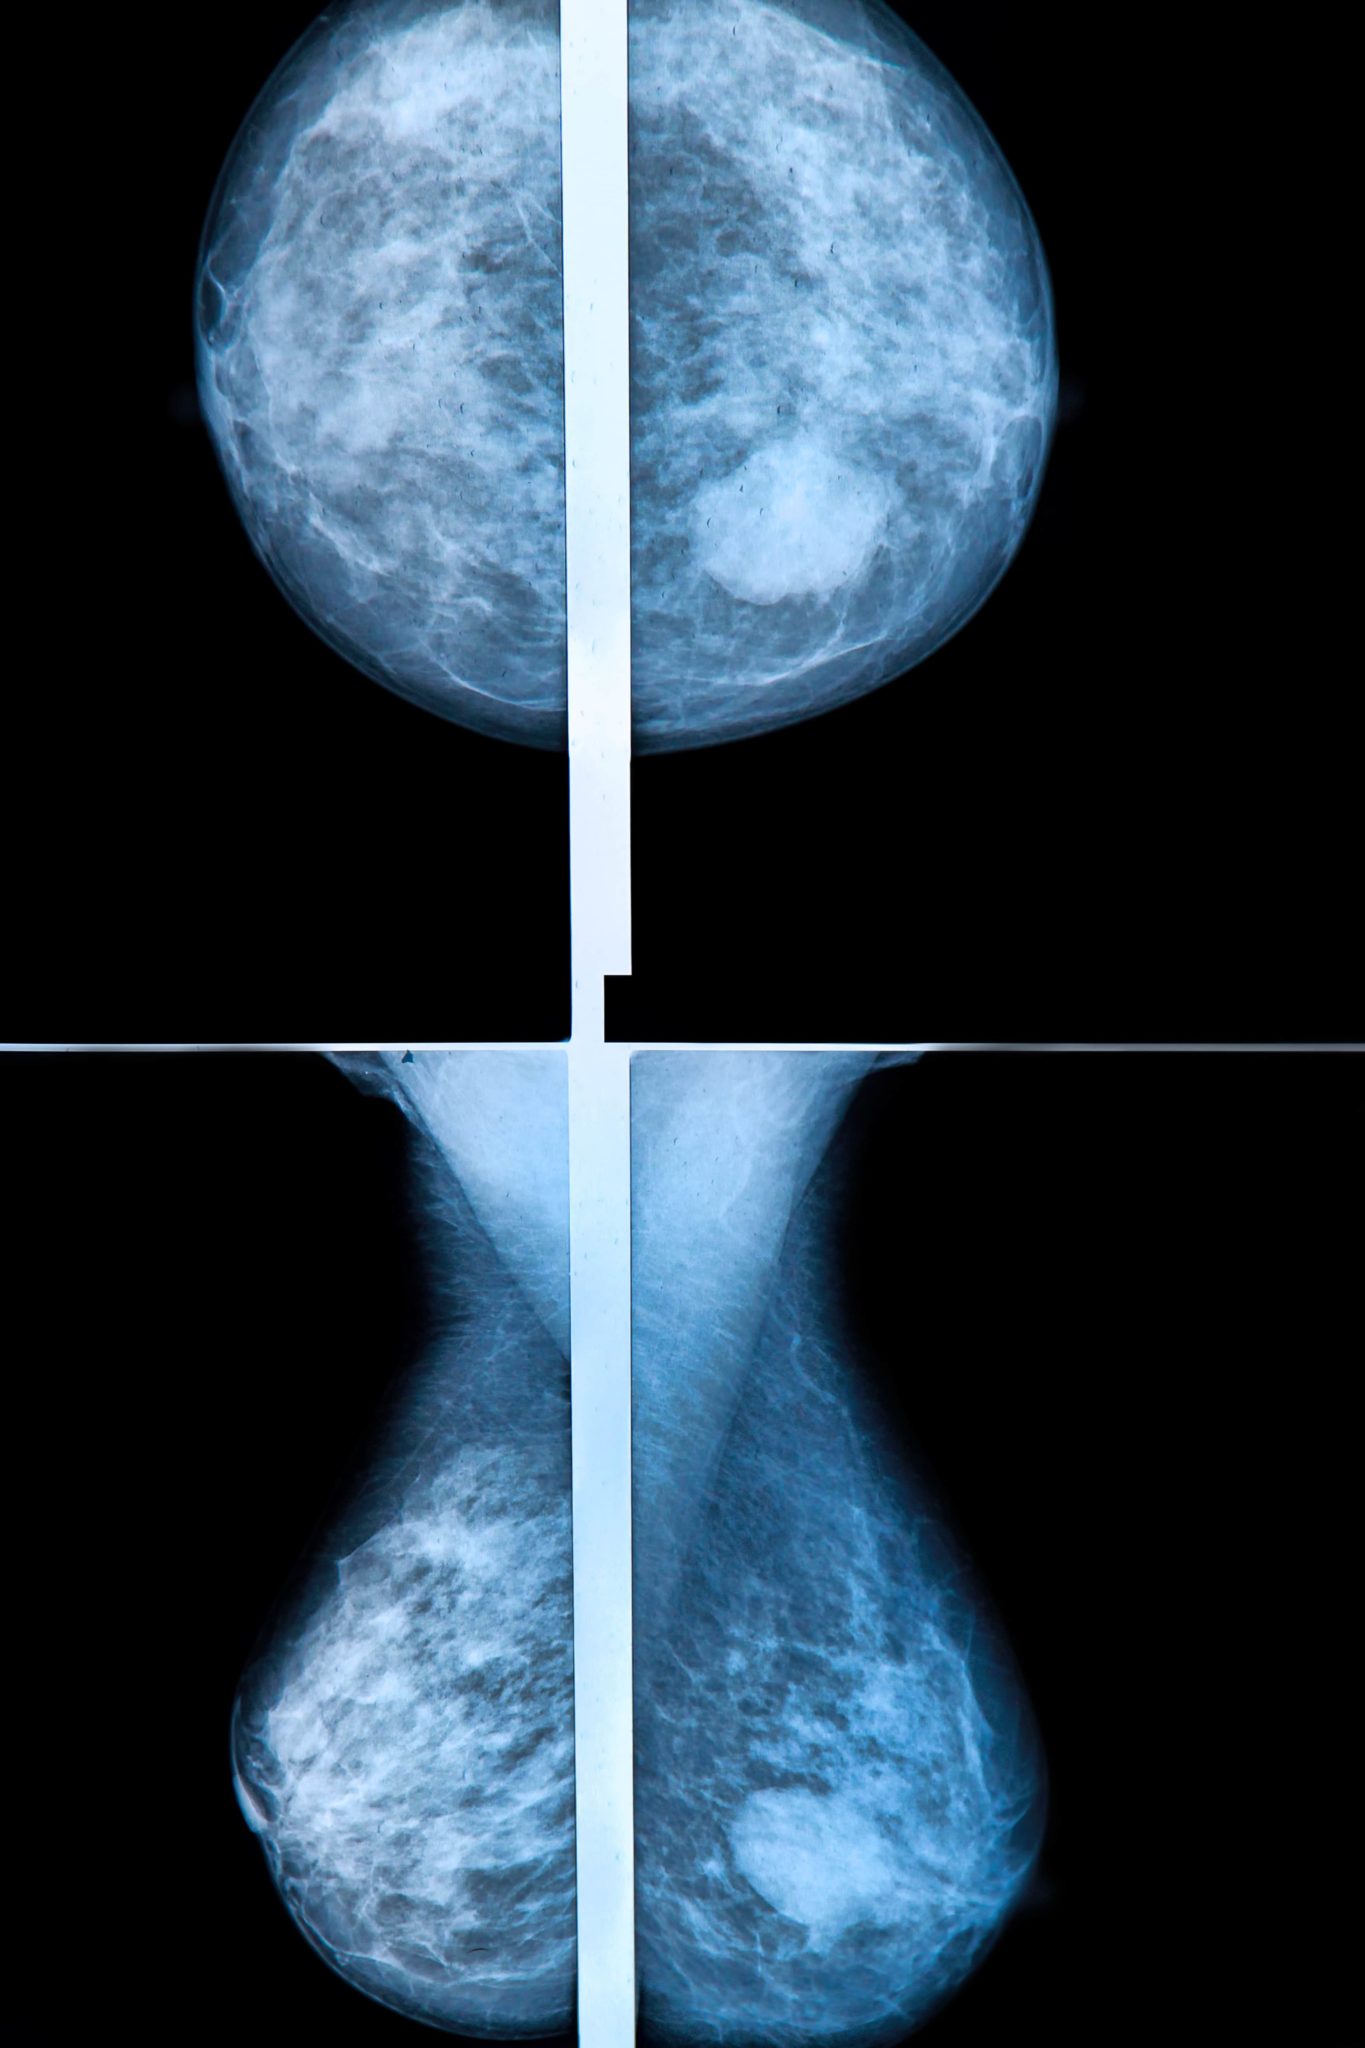 Image Comparing how a radiologist sees a 2D mammogram vs how a radiologists sees a 3D Mammogram